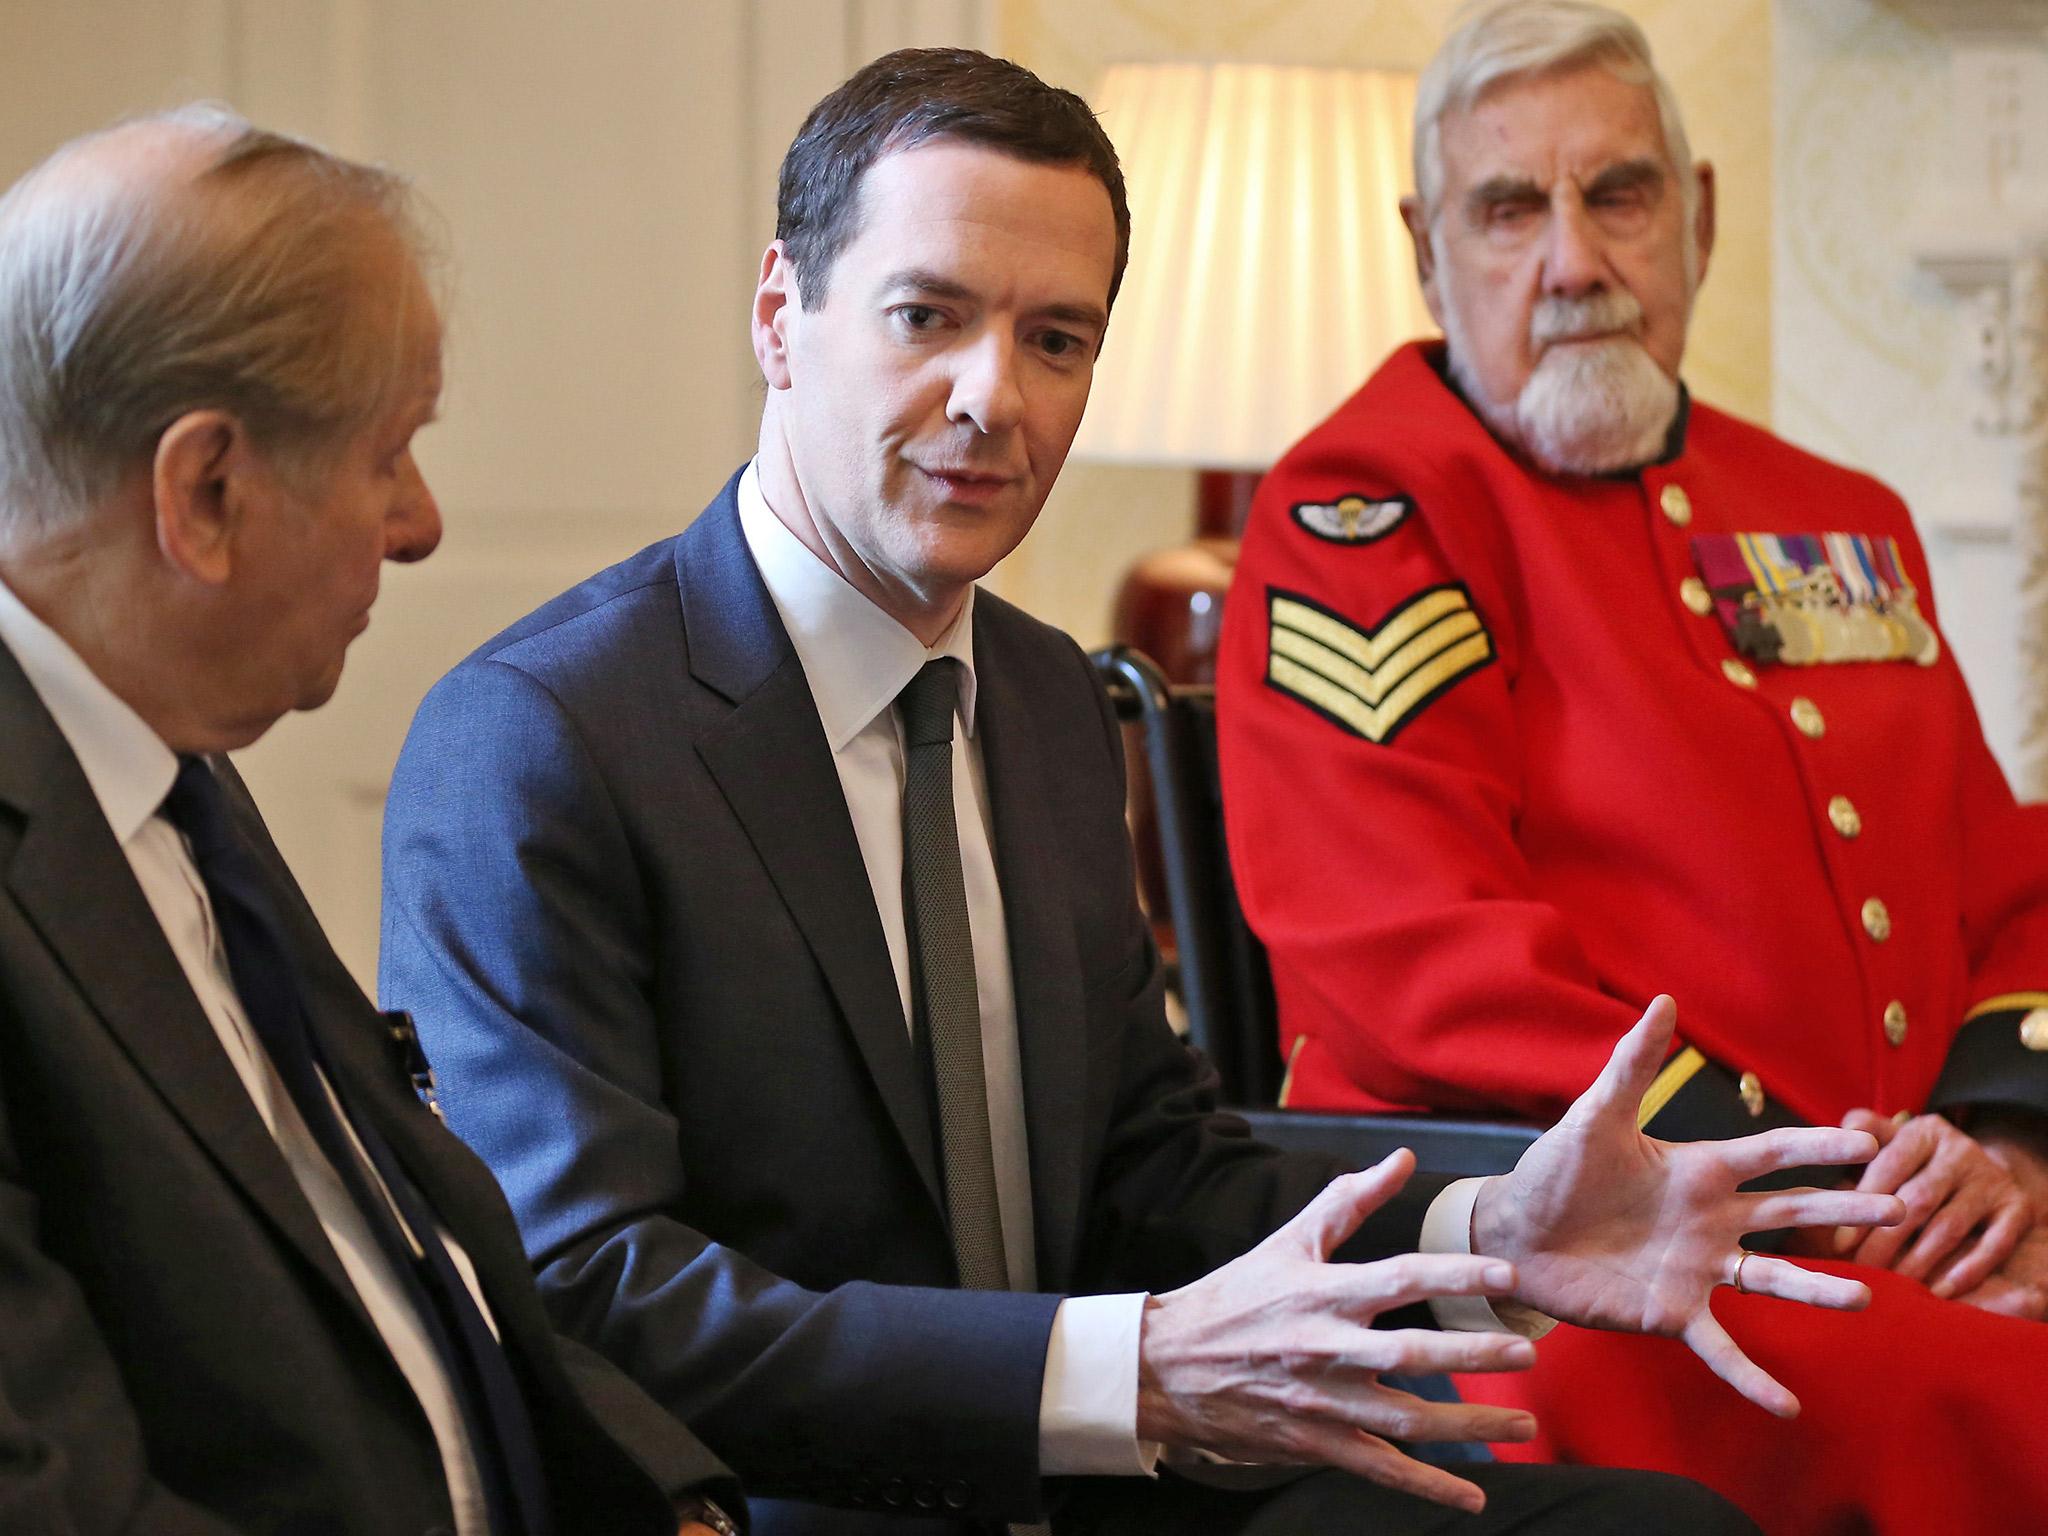 The move could damage George Osborne’s chances of succeeding David Cameron as leader of the party